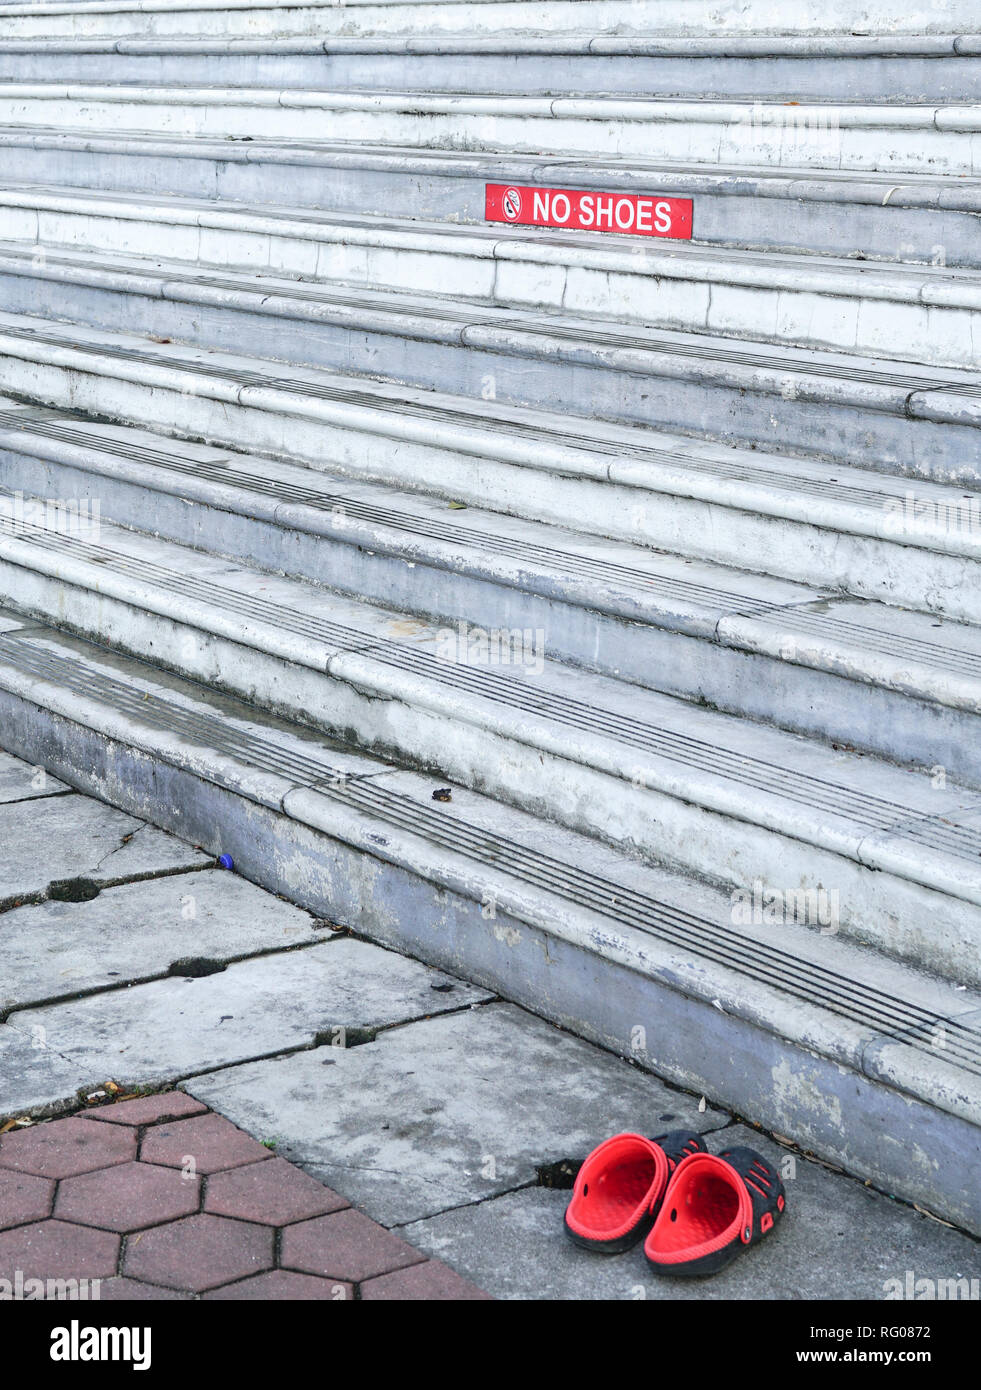 Red color No shoes sign on staircase Stock Photo